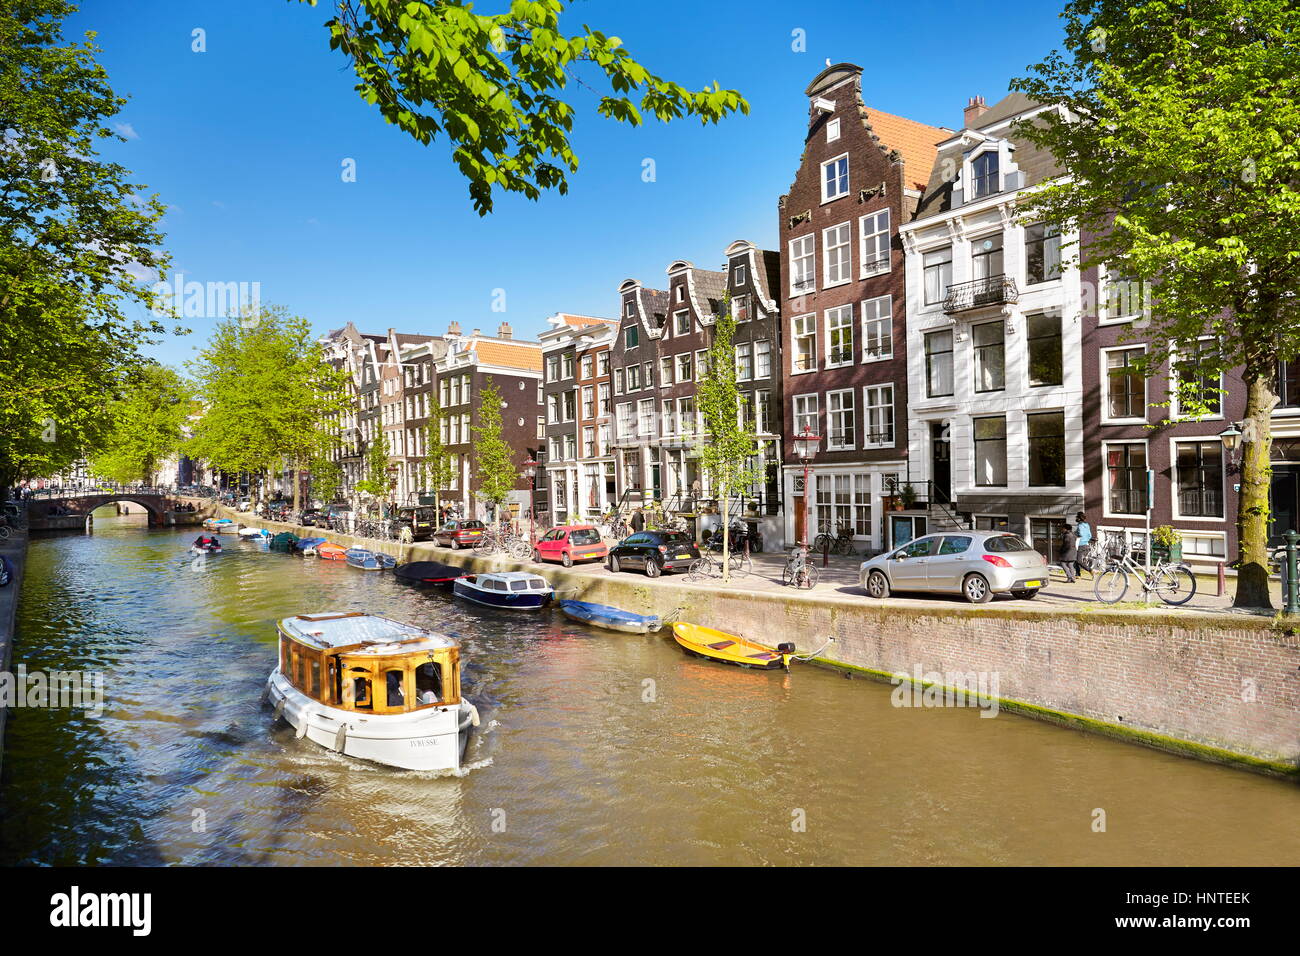 Boat on the canal, Amsterdam, Holland, Netherlands Stock Photo